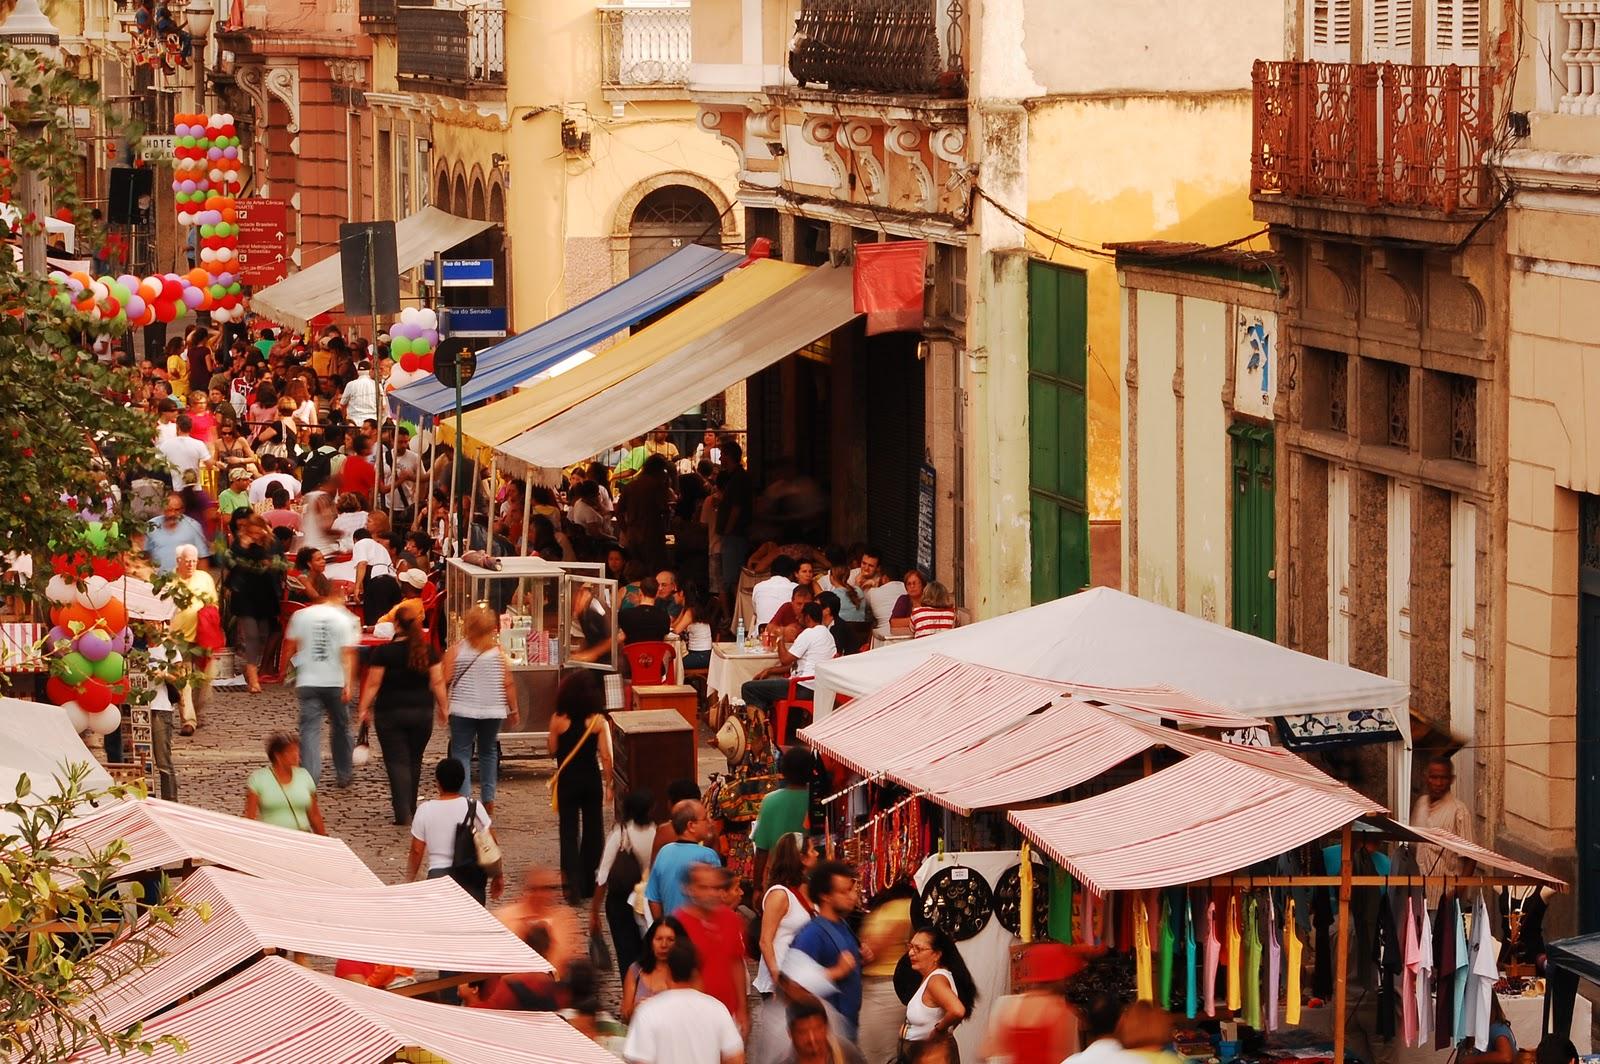 Cover image of this place Feira do Lavradio